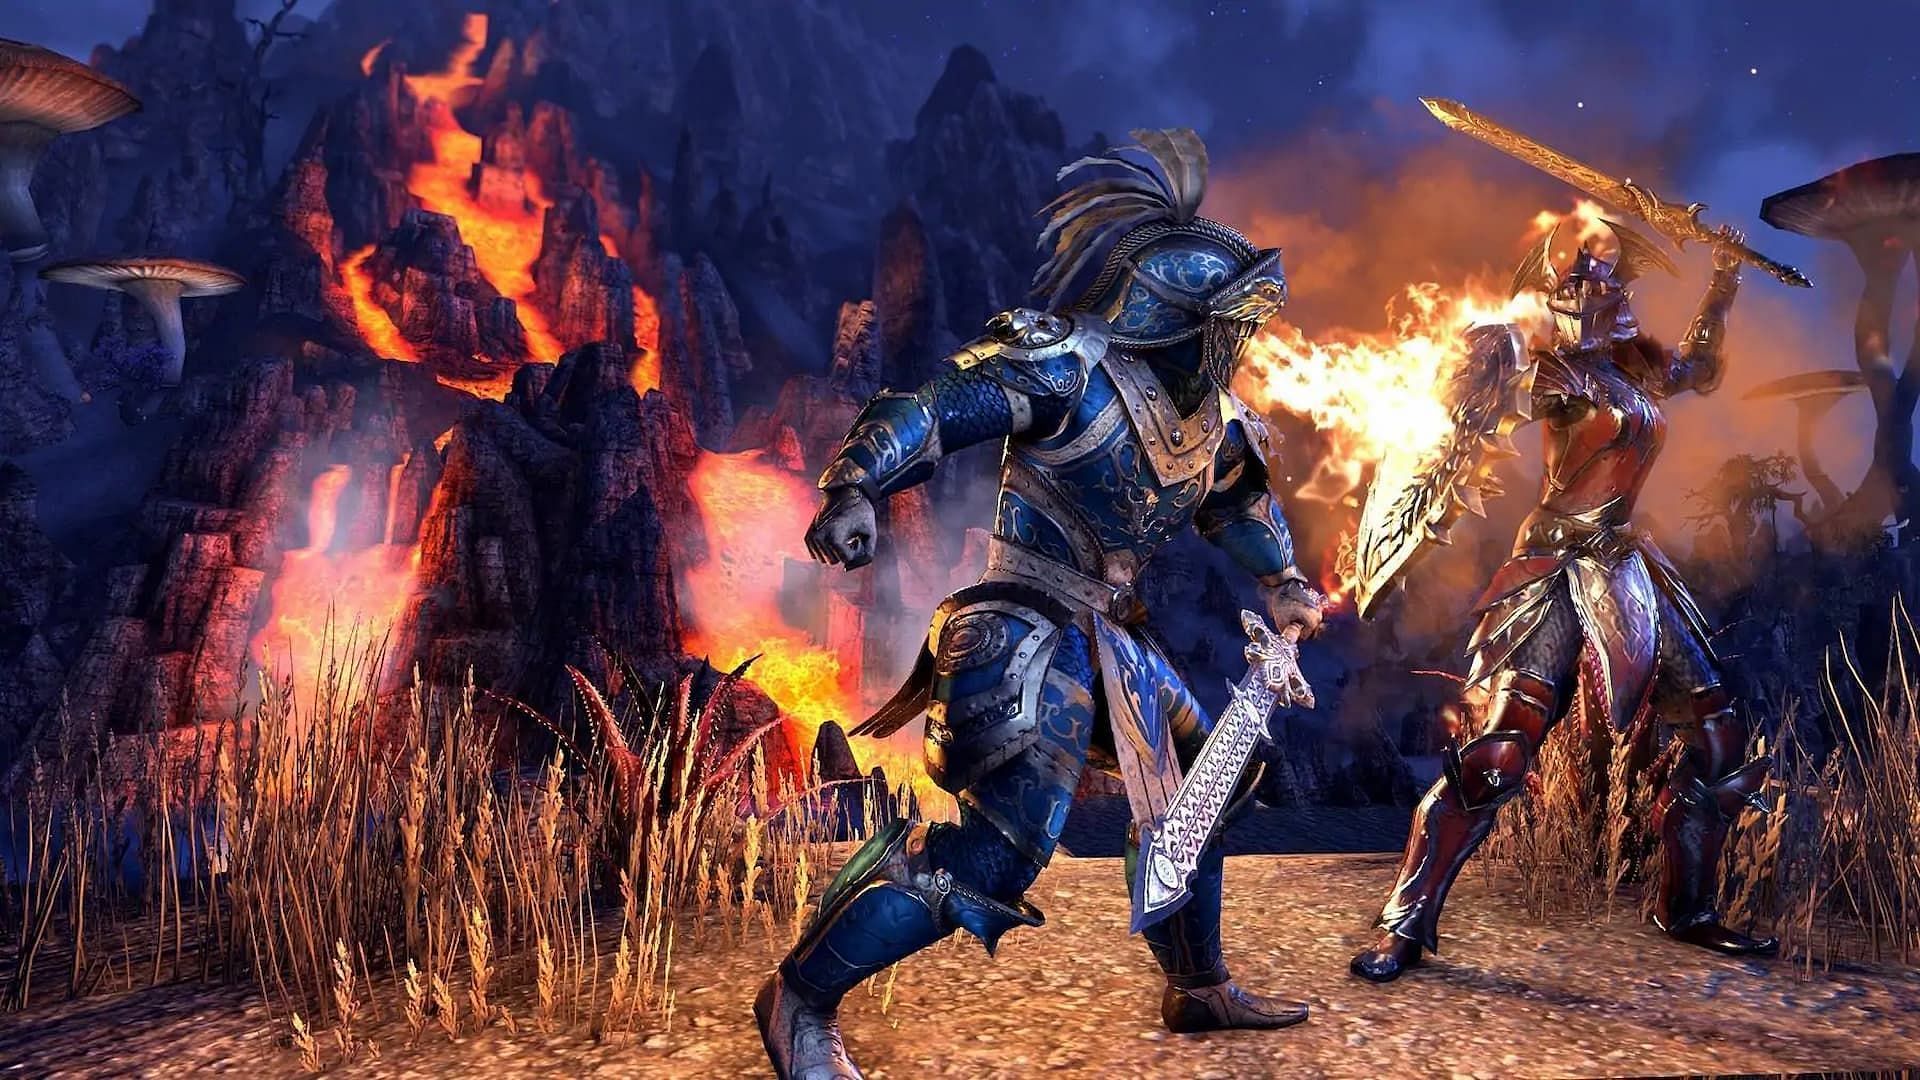 Two players dueling in The Elder Scrolls Online